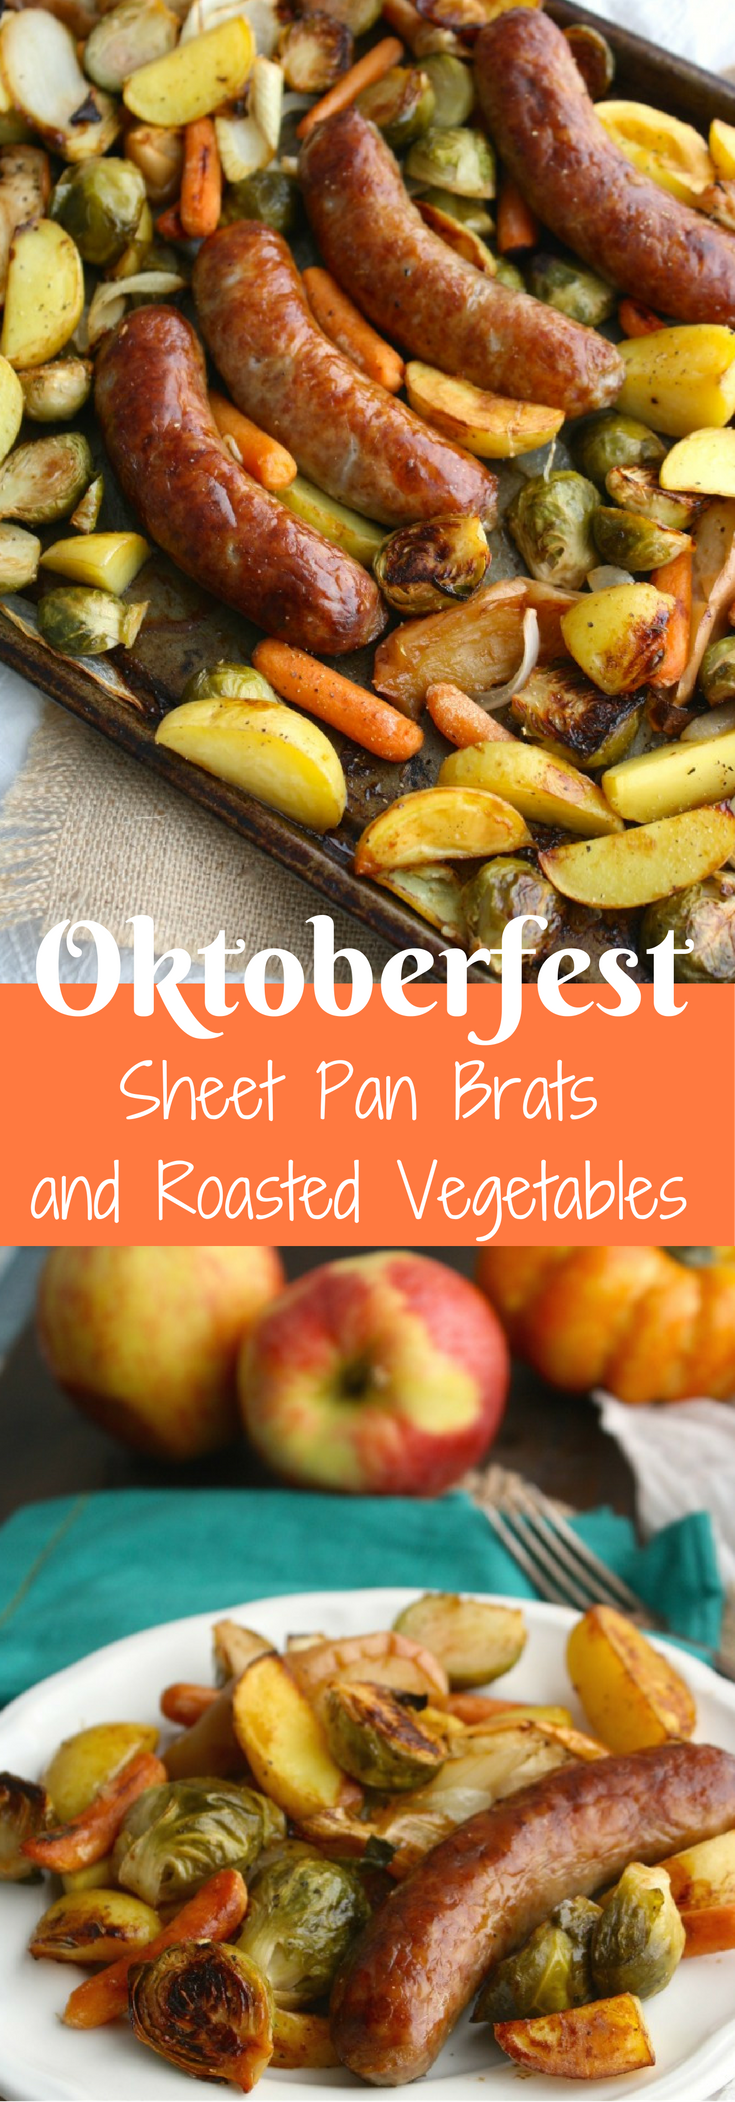 Get ready for your favorite fall foods: Oktoberfest Sheet Pan Brats with Vegetables is tasty, filling, and so easy to make!